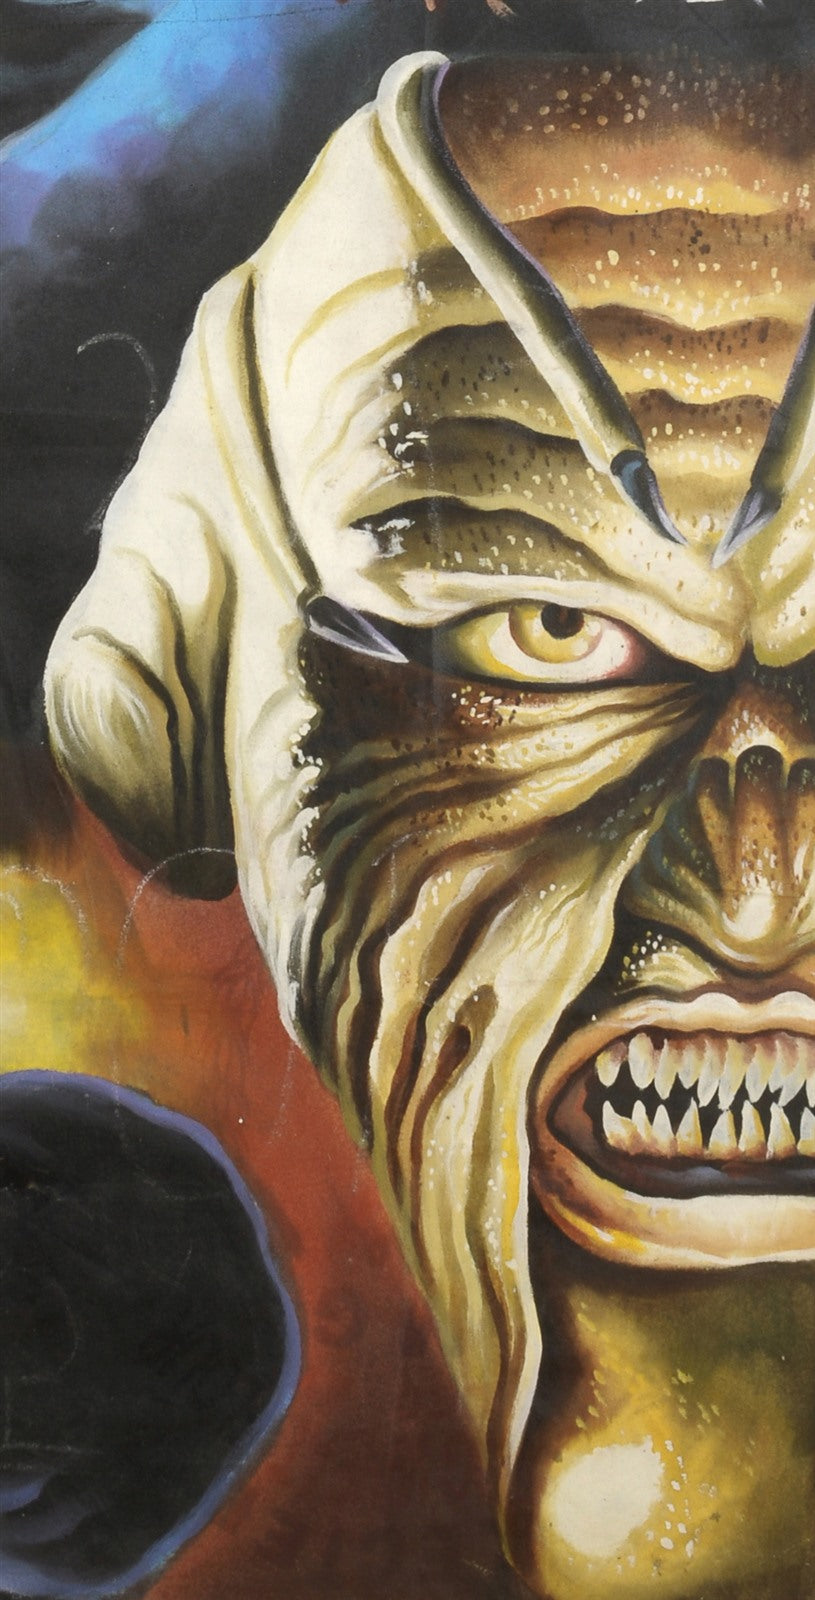 Jeepers Creepers movie poster hand painted in Ghana for the local cinema art close up